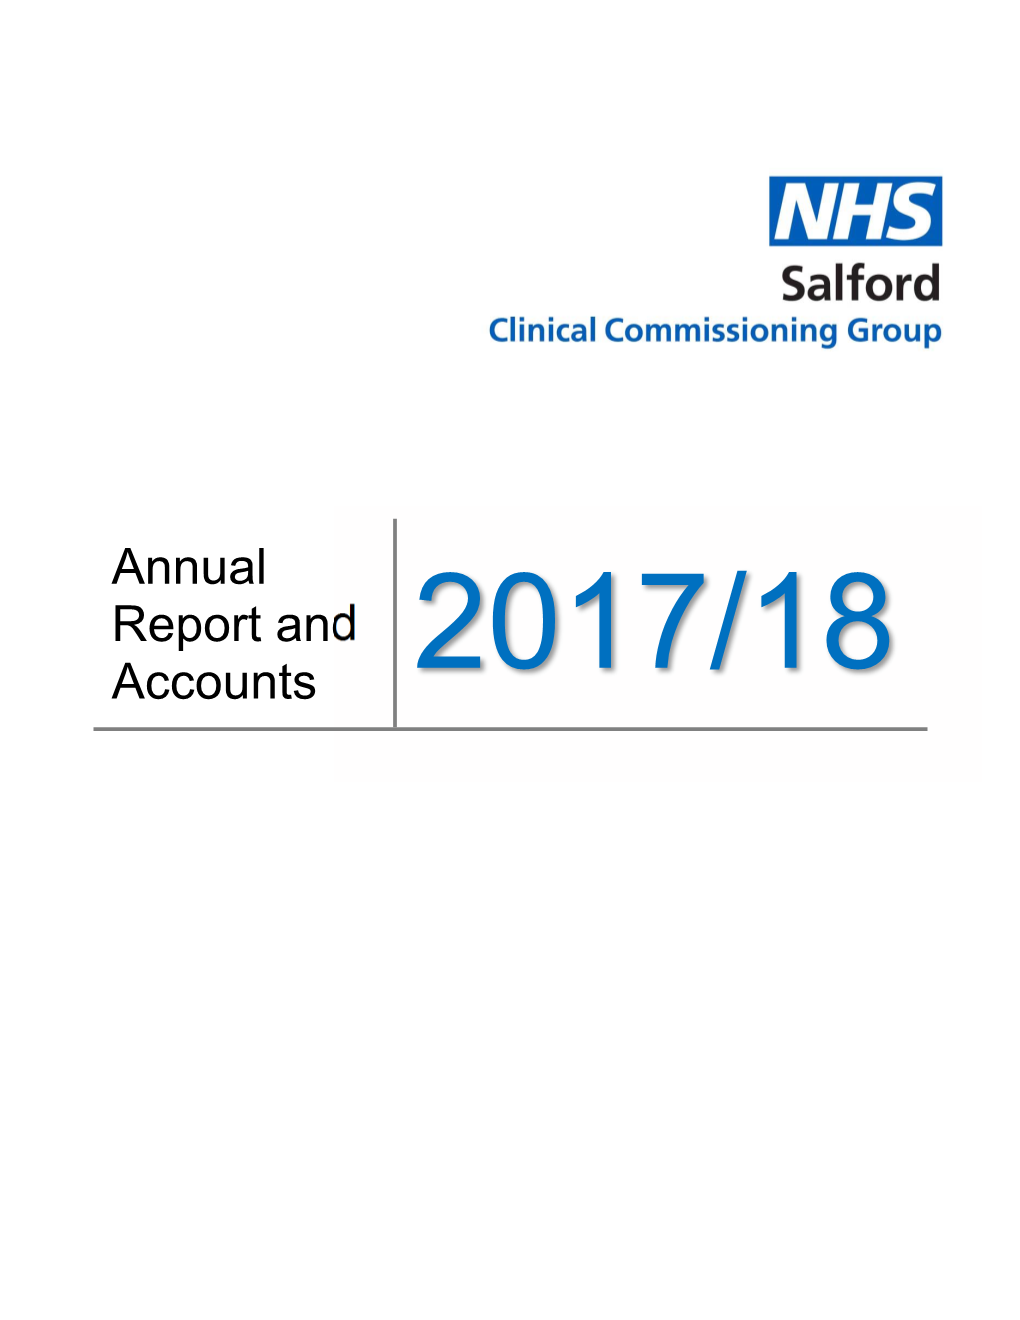 Annual Report and Accounts 2017/18 Our Approach to This Report